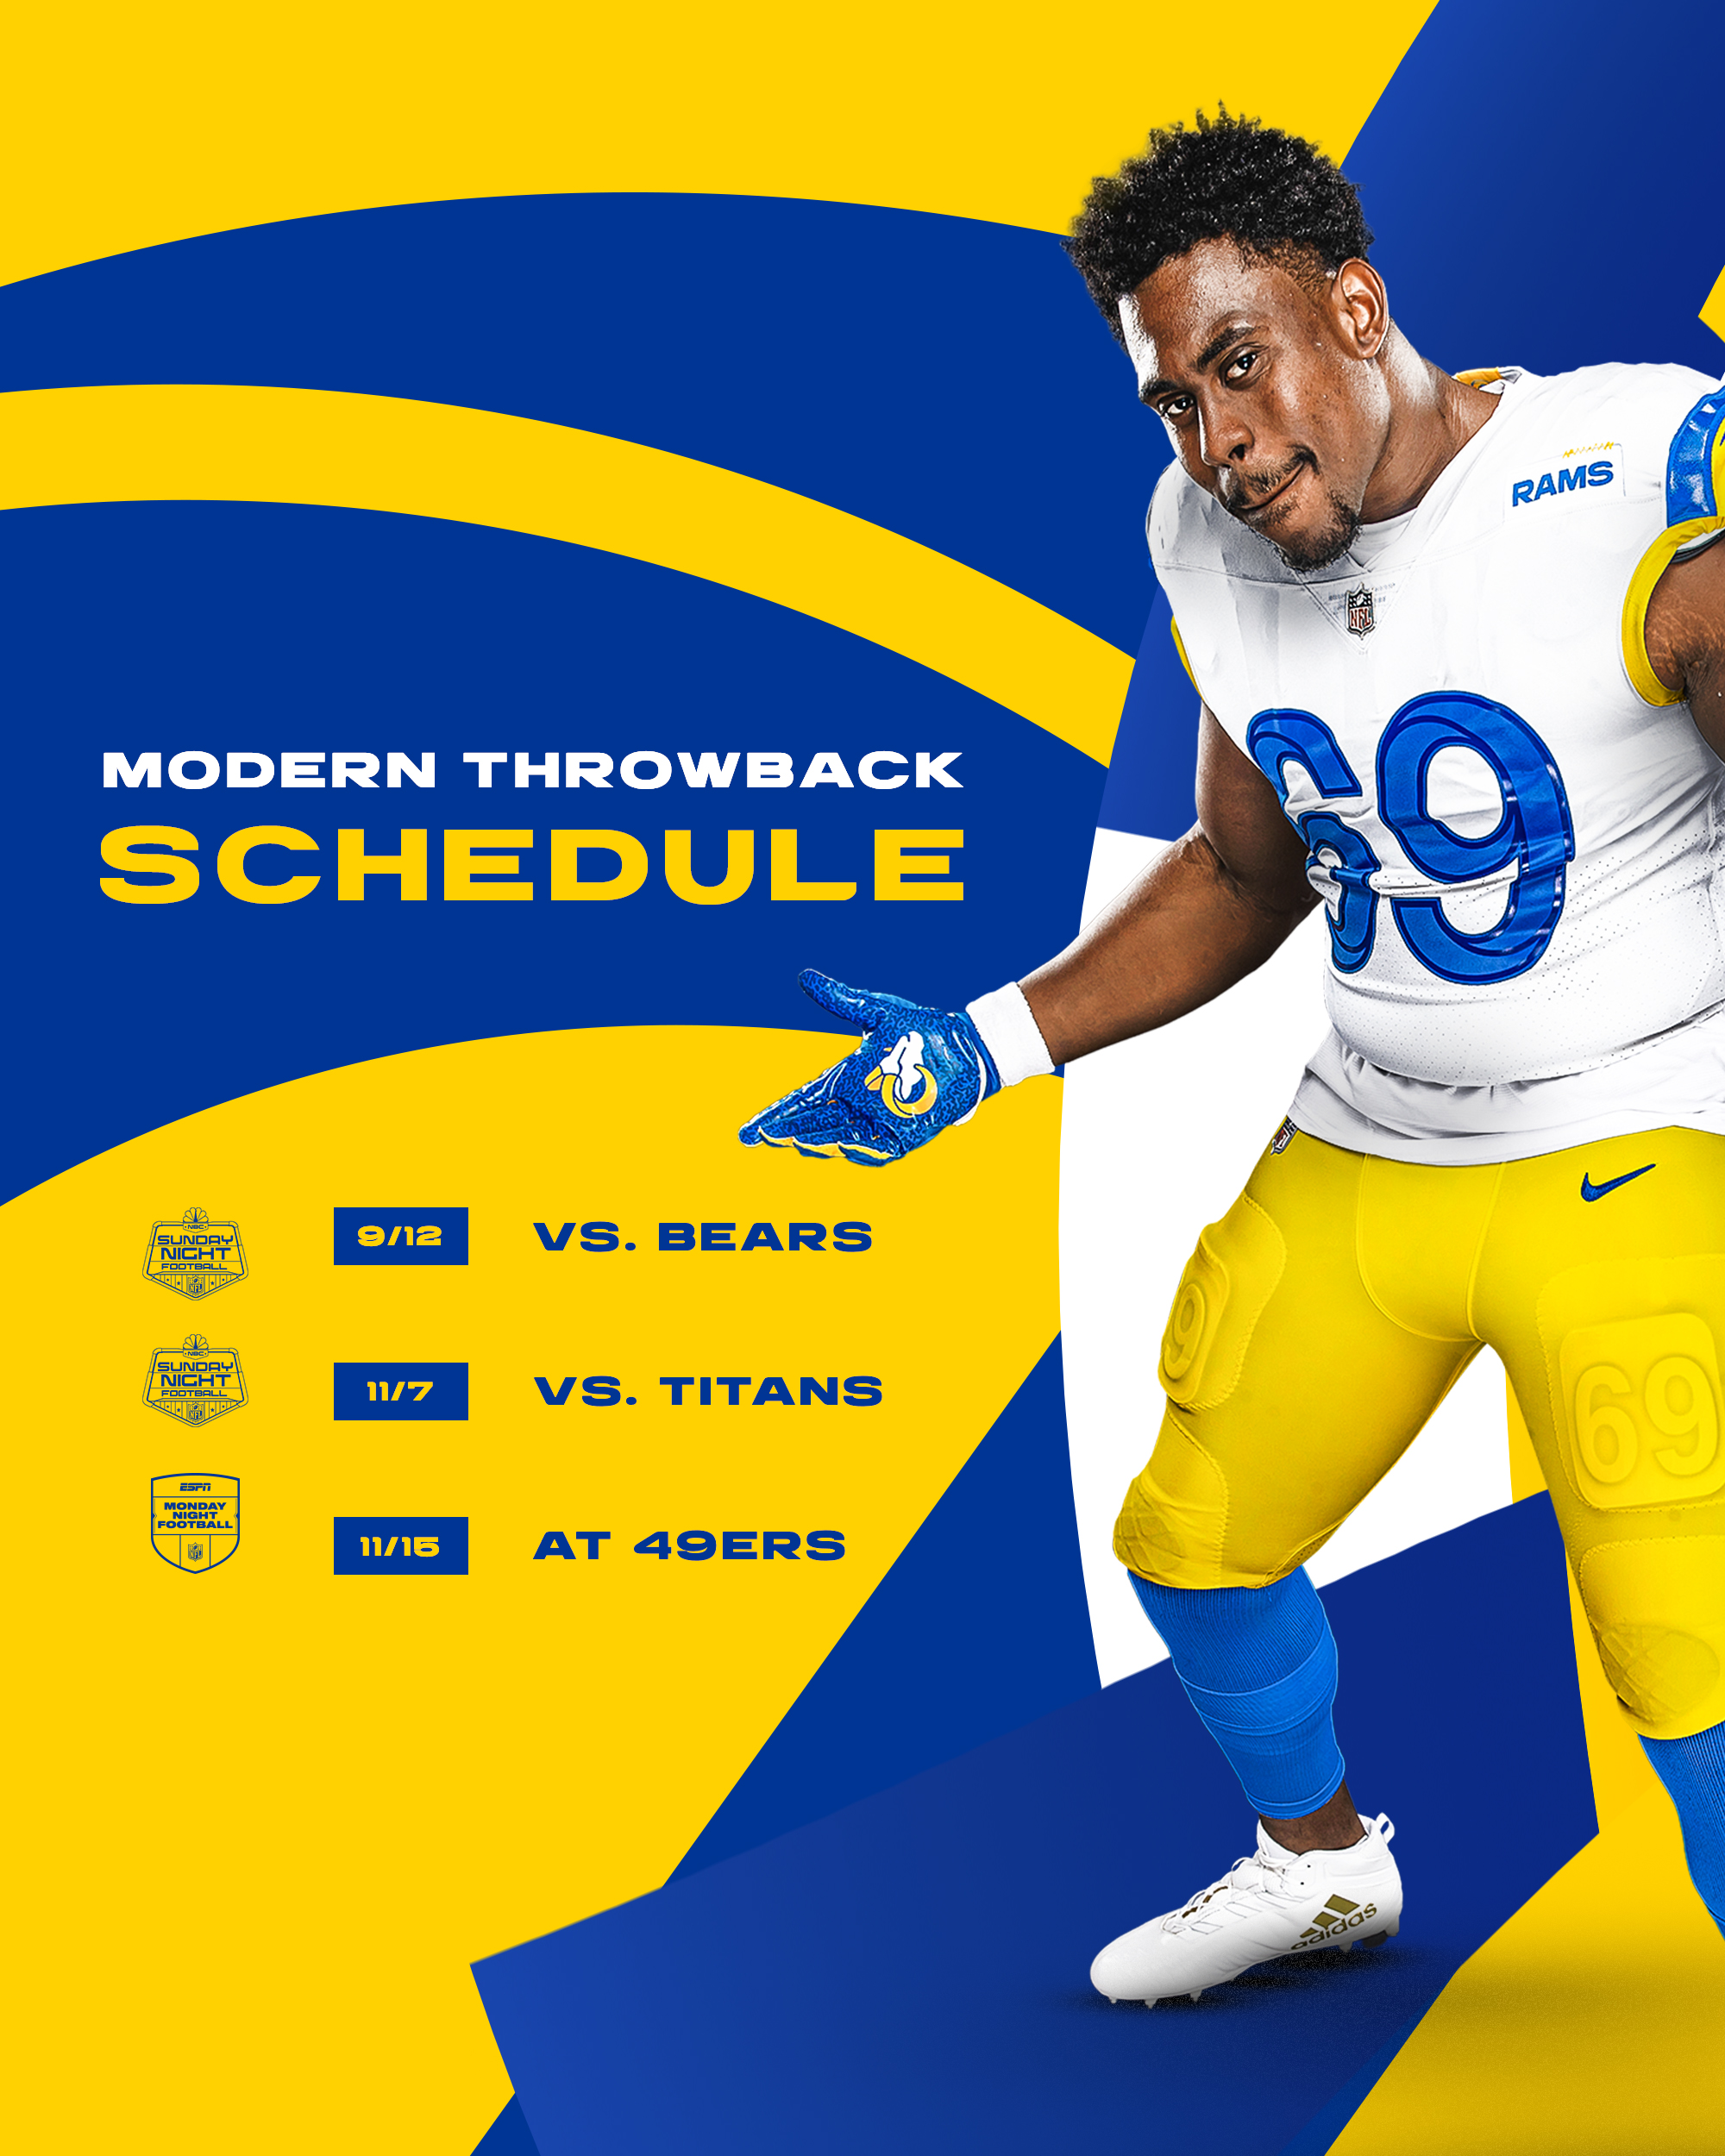 Los Angeles Rams on Twitter: 'Three times on prime time 